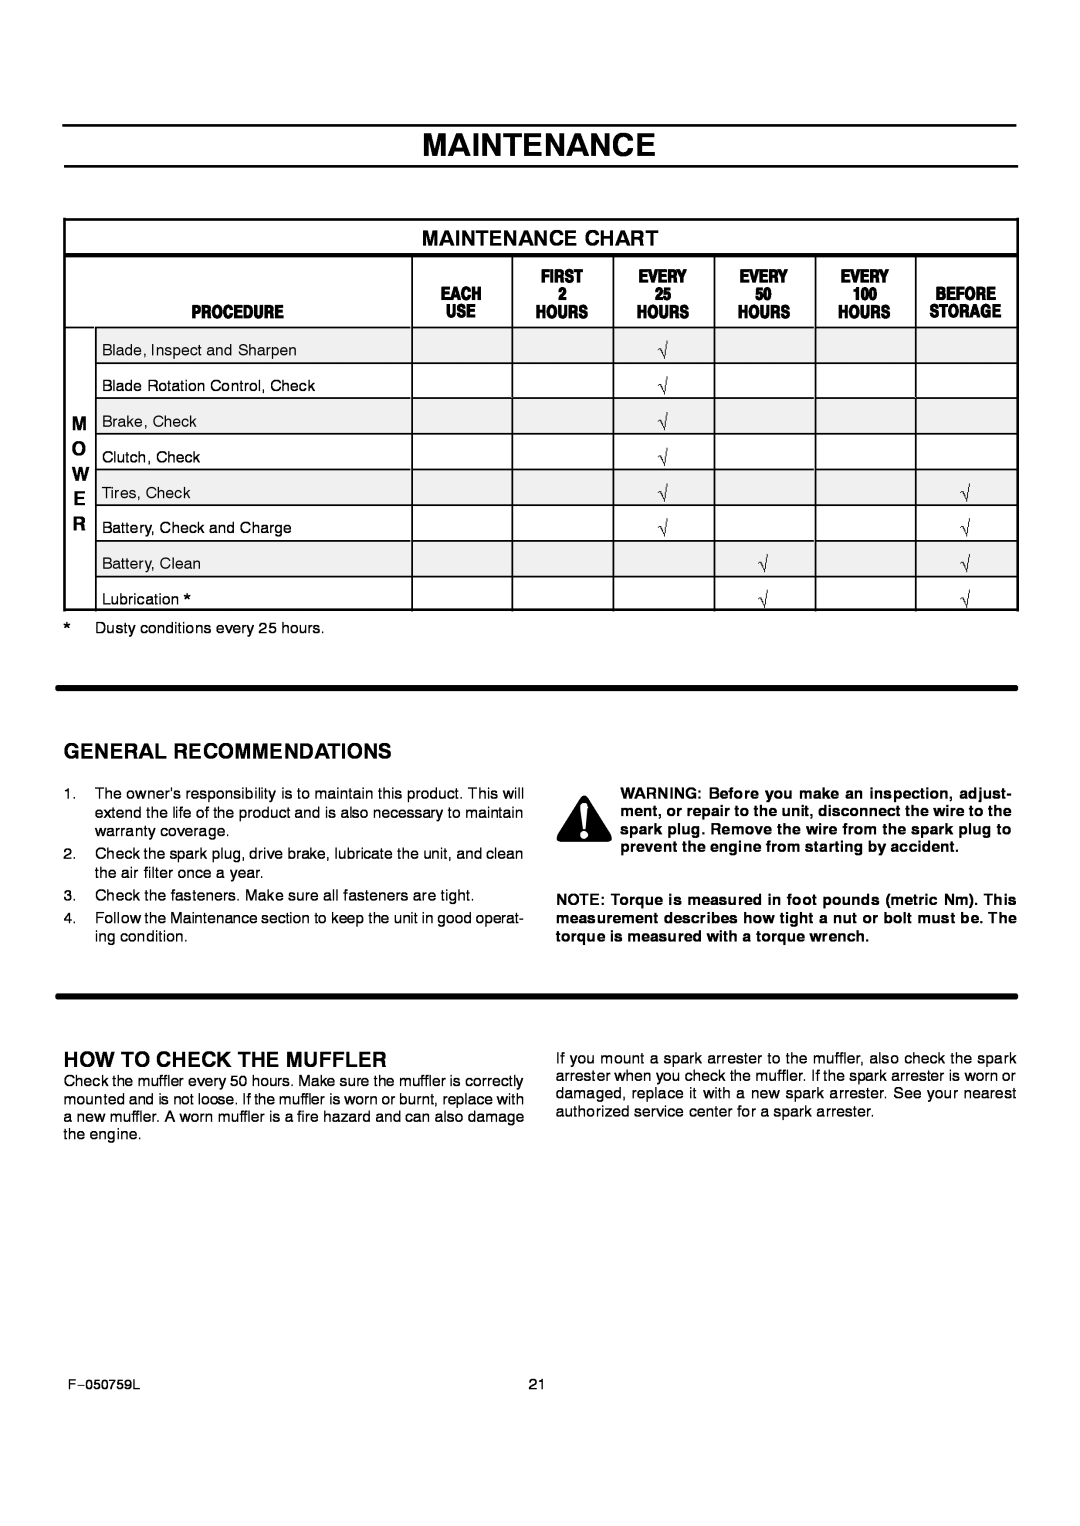 Rover 405012x108A owner manual Maintenance Chart, General Recommendations, How To Check The Muffler 